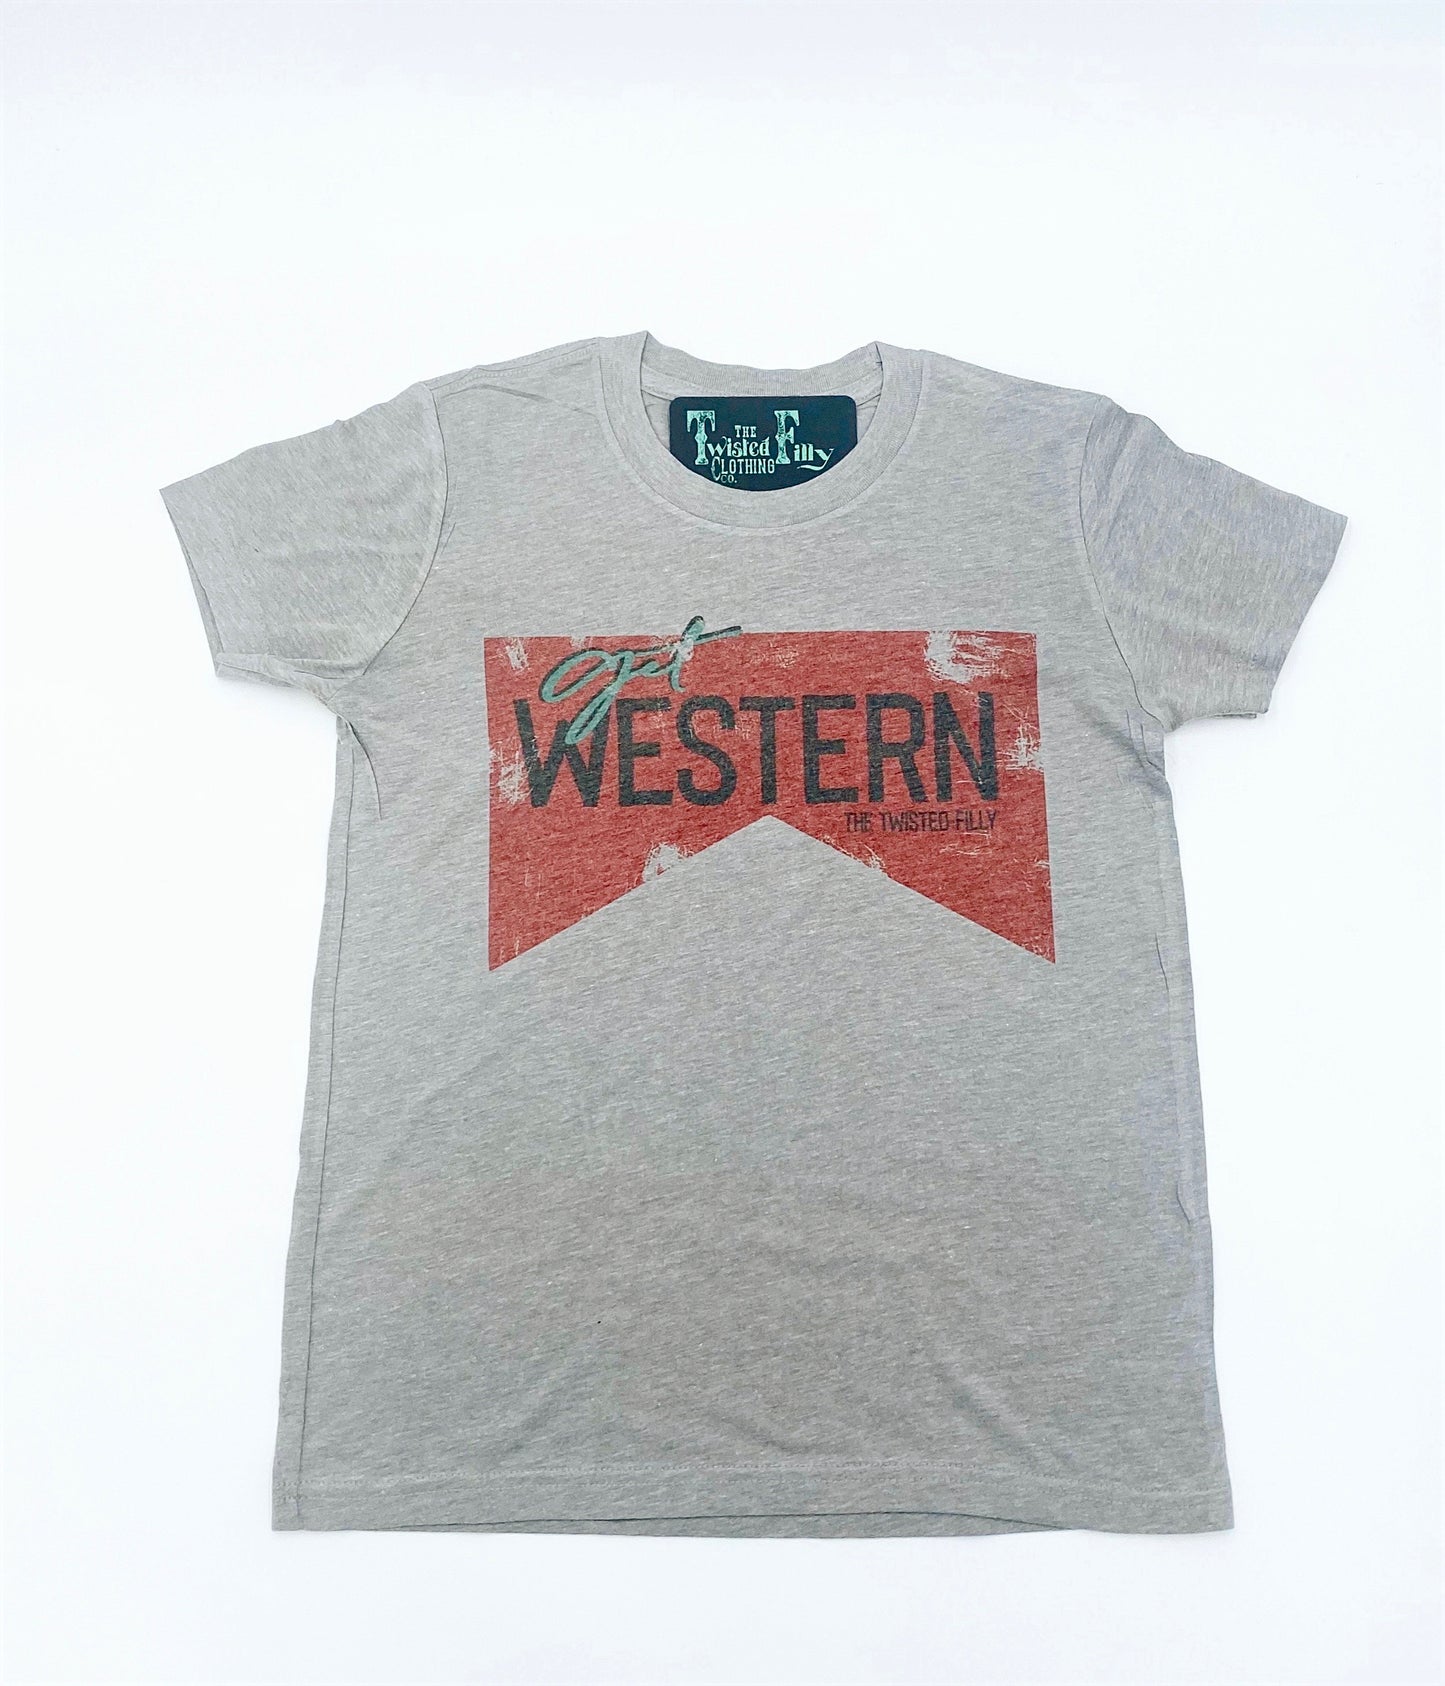 Get Western - S/S Youth Tee - Grey